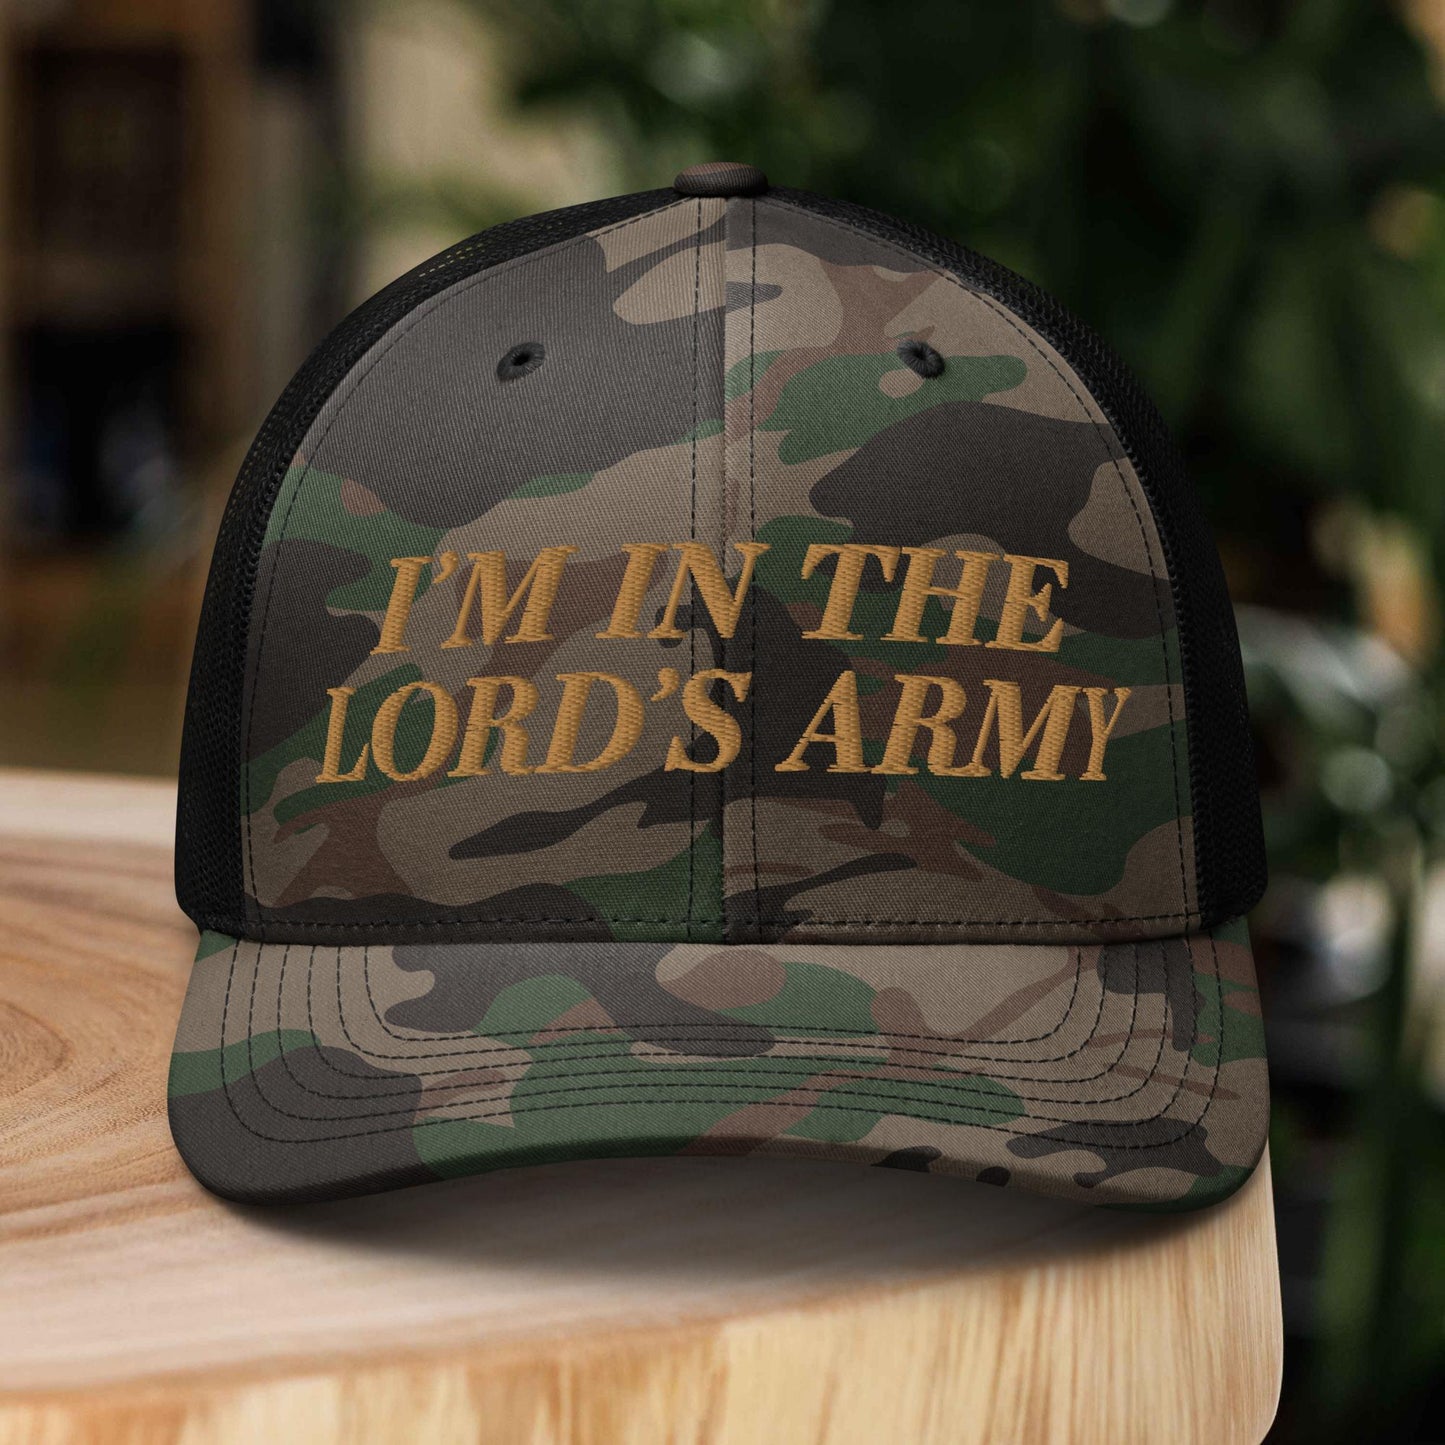 Lord's Army Camouflage trucker hat